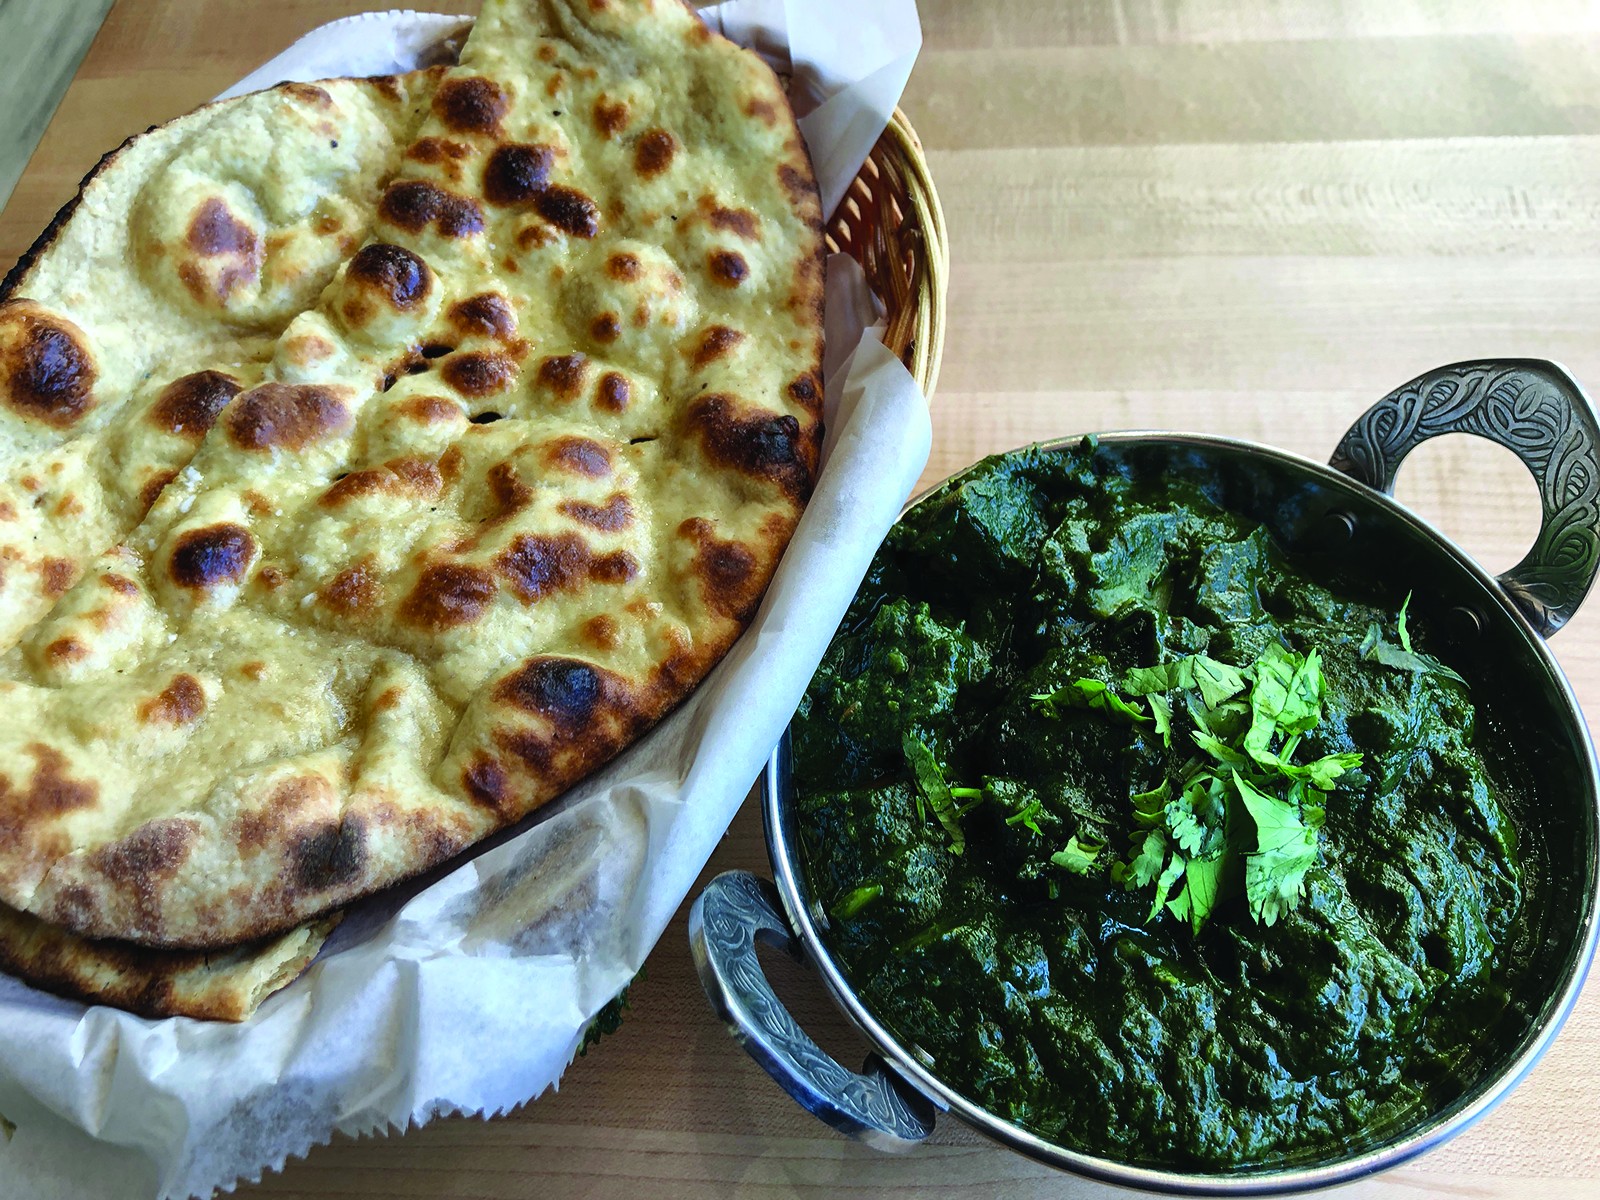 Honest's aloo palak blends spinach and potatoes in a filling, fiery masala-scented dish with roti bread.